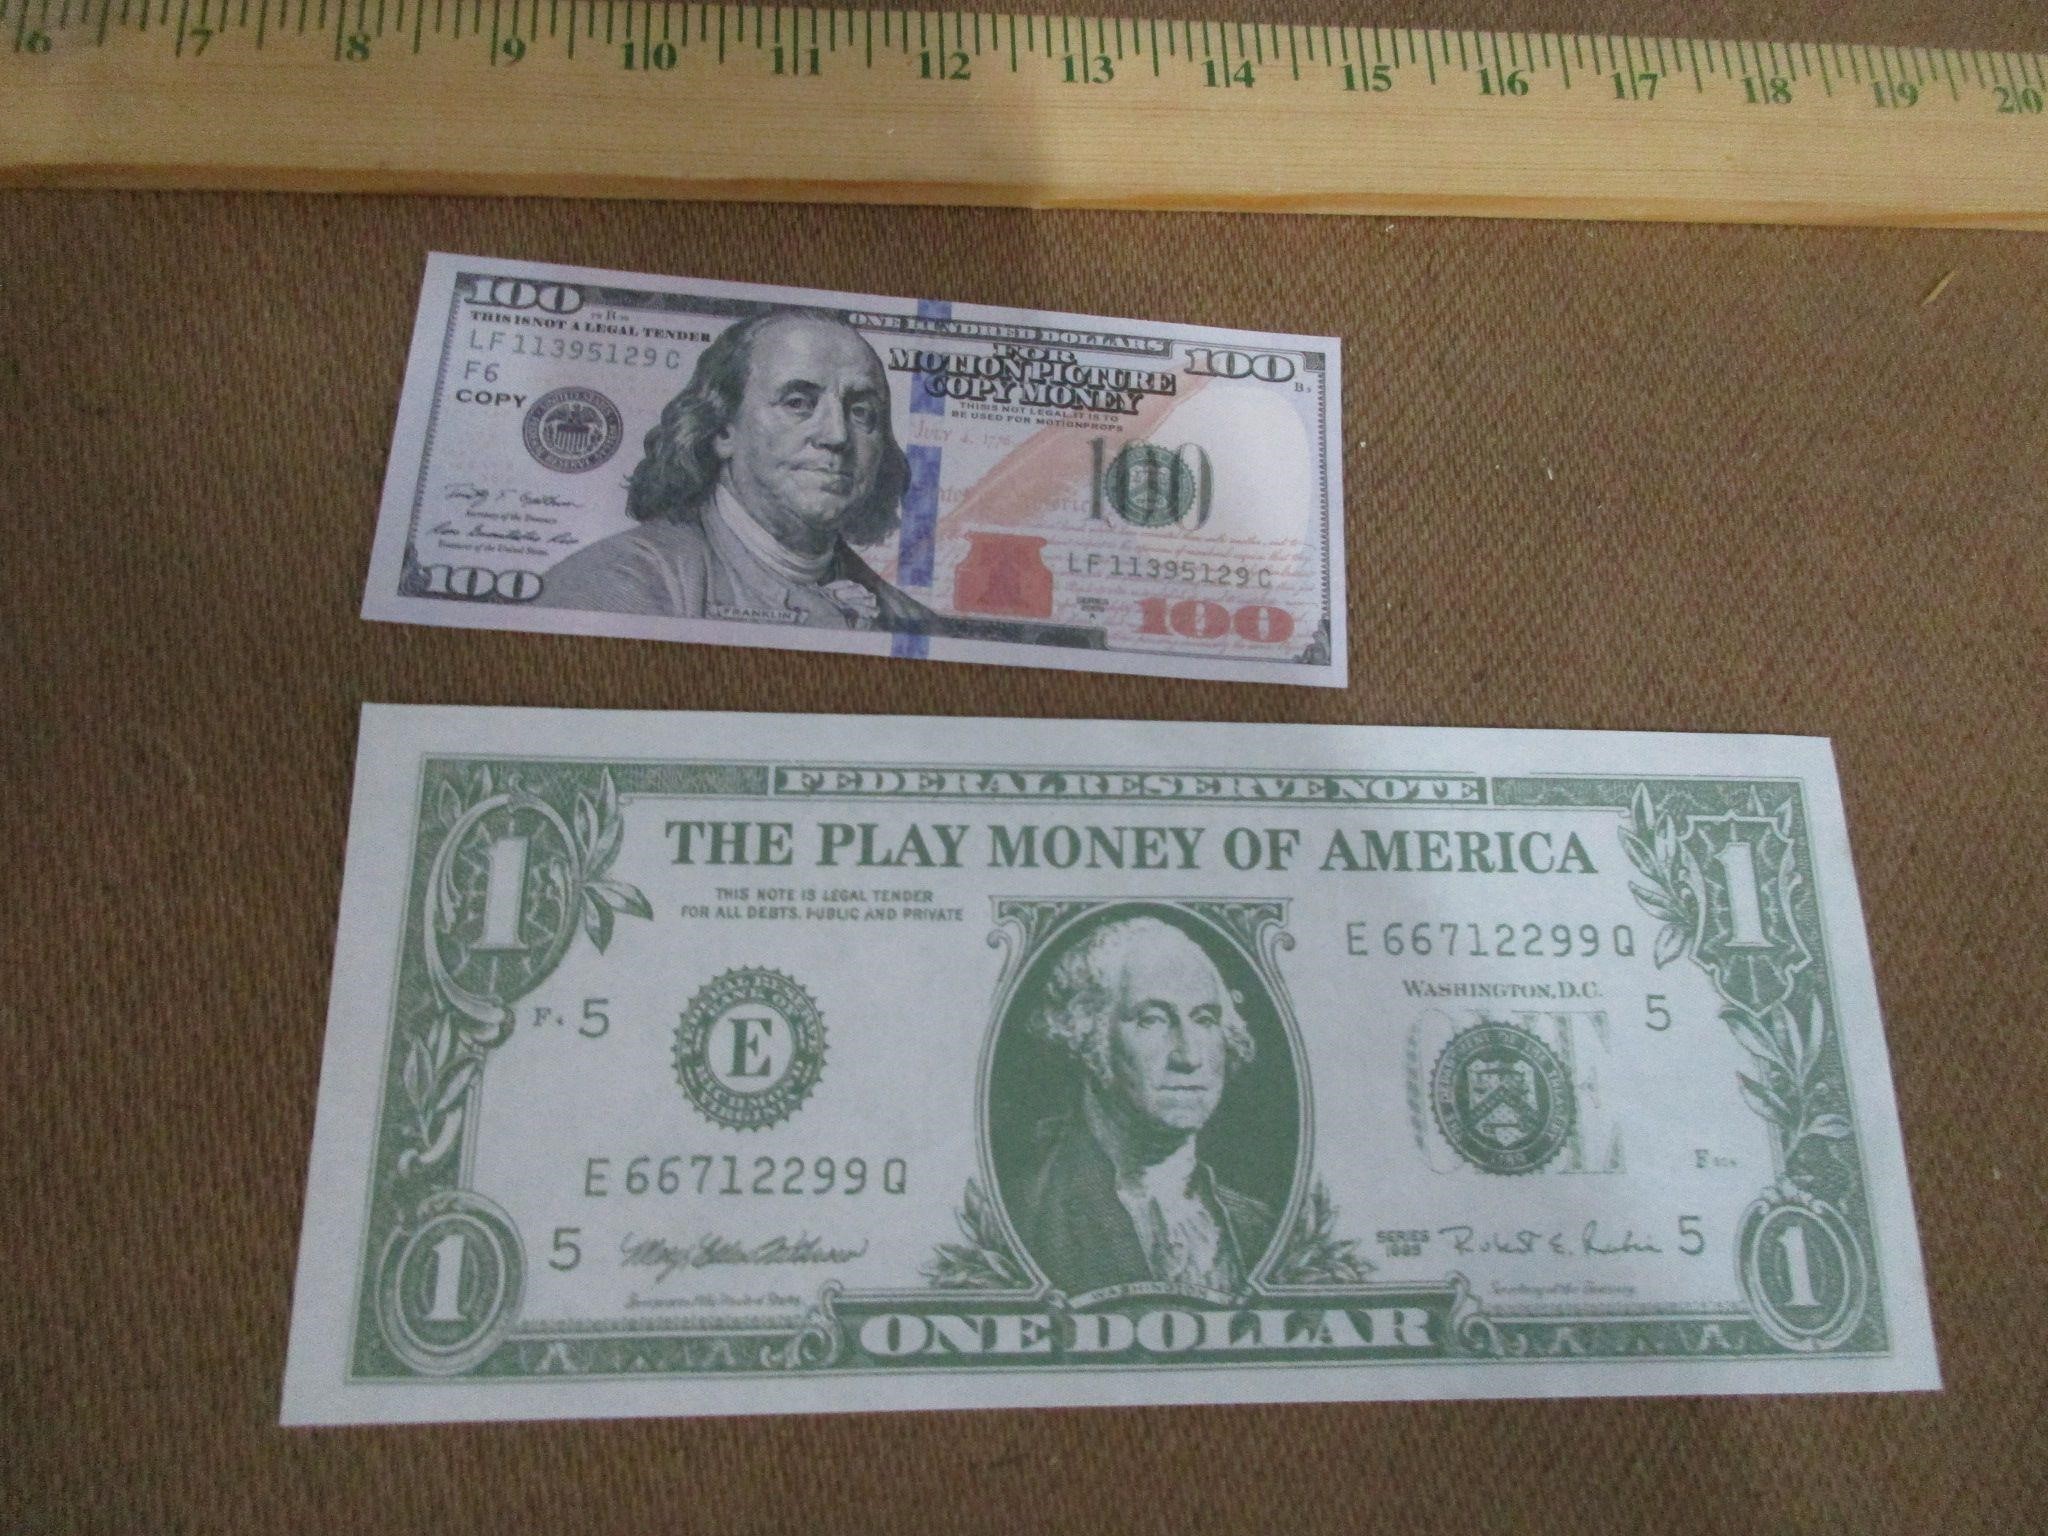 $100 dollar bill - Motion Picture Quality, not